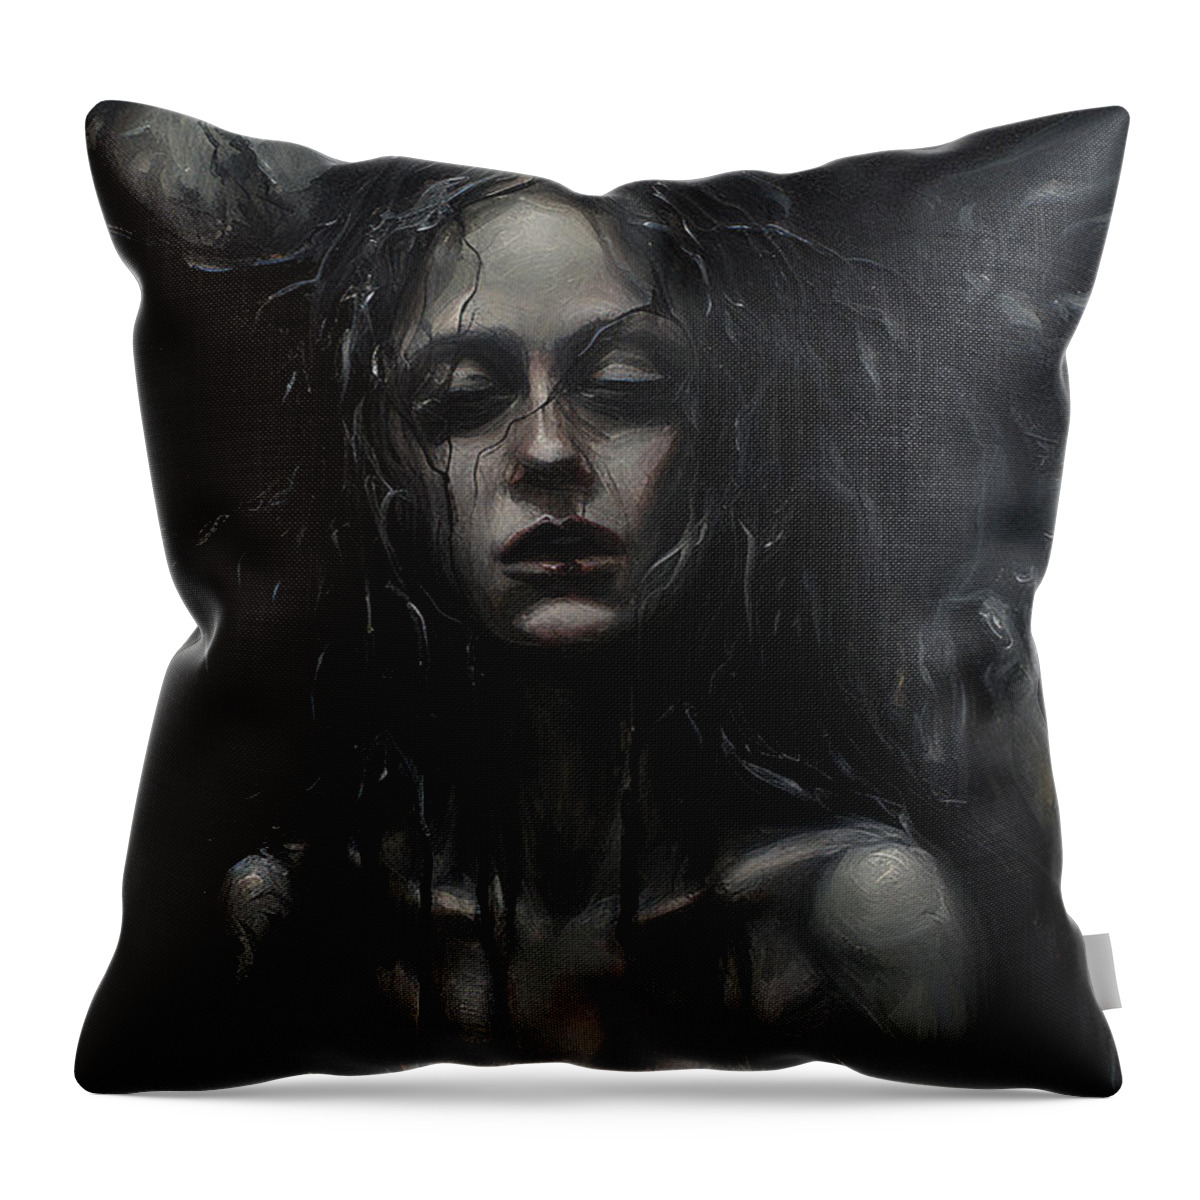 Drugs Throw Pillow featuring the digital art Aunt Hazel by Jackson Parrish